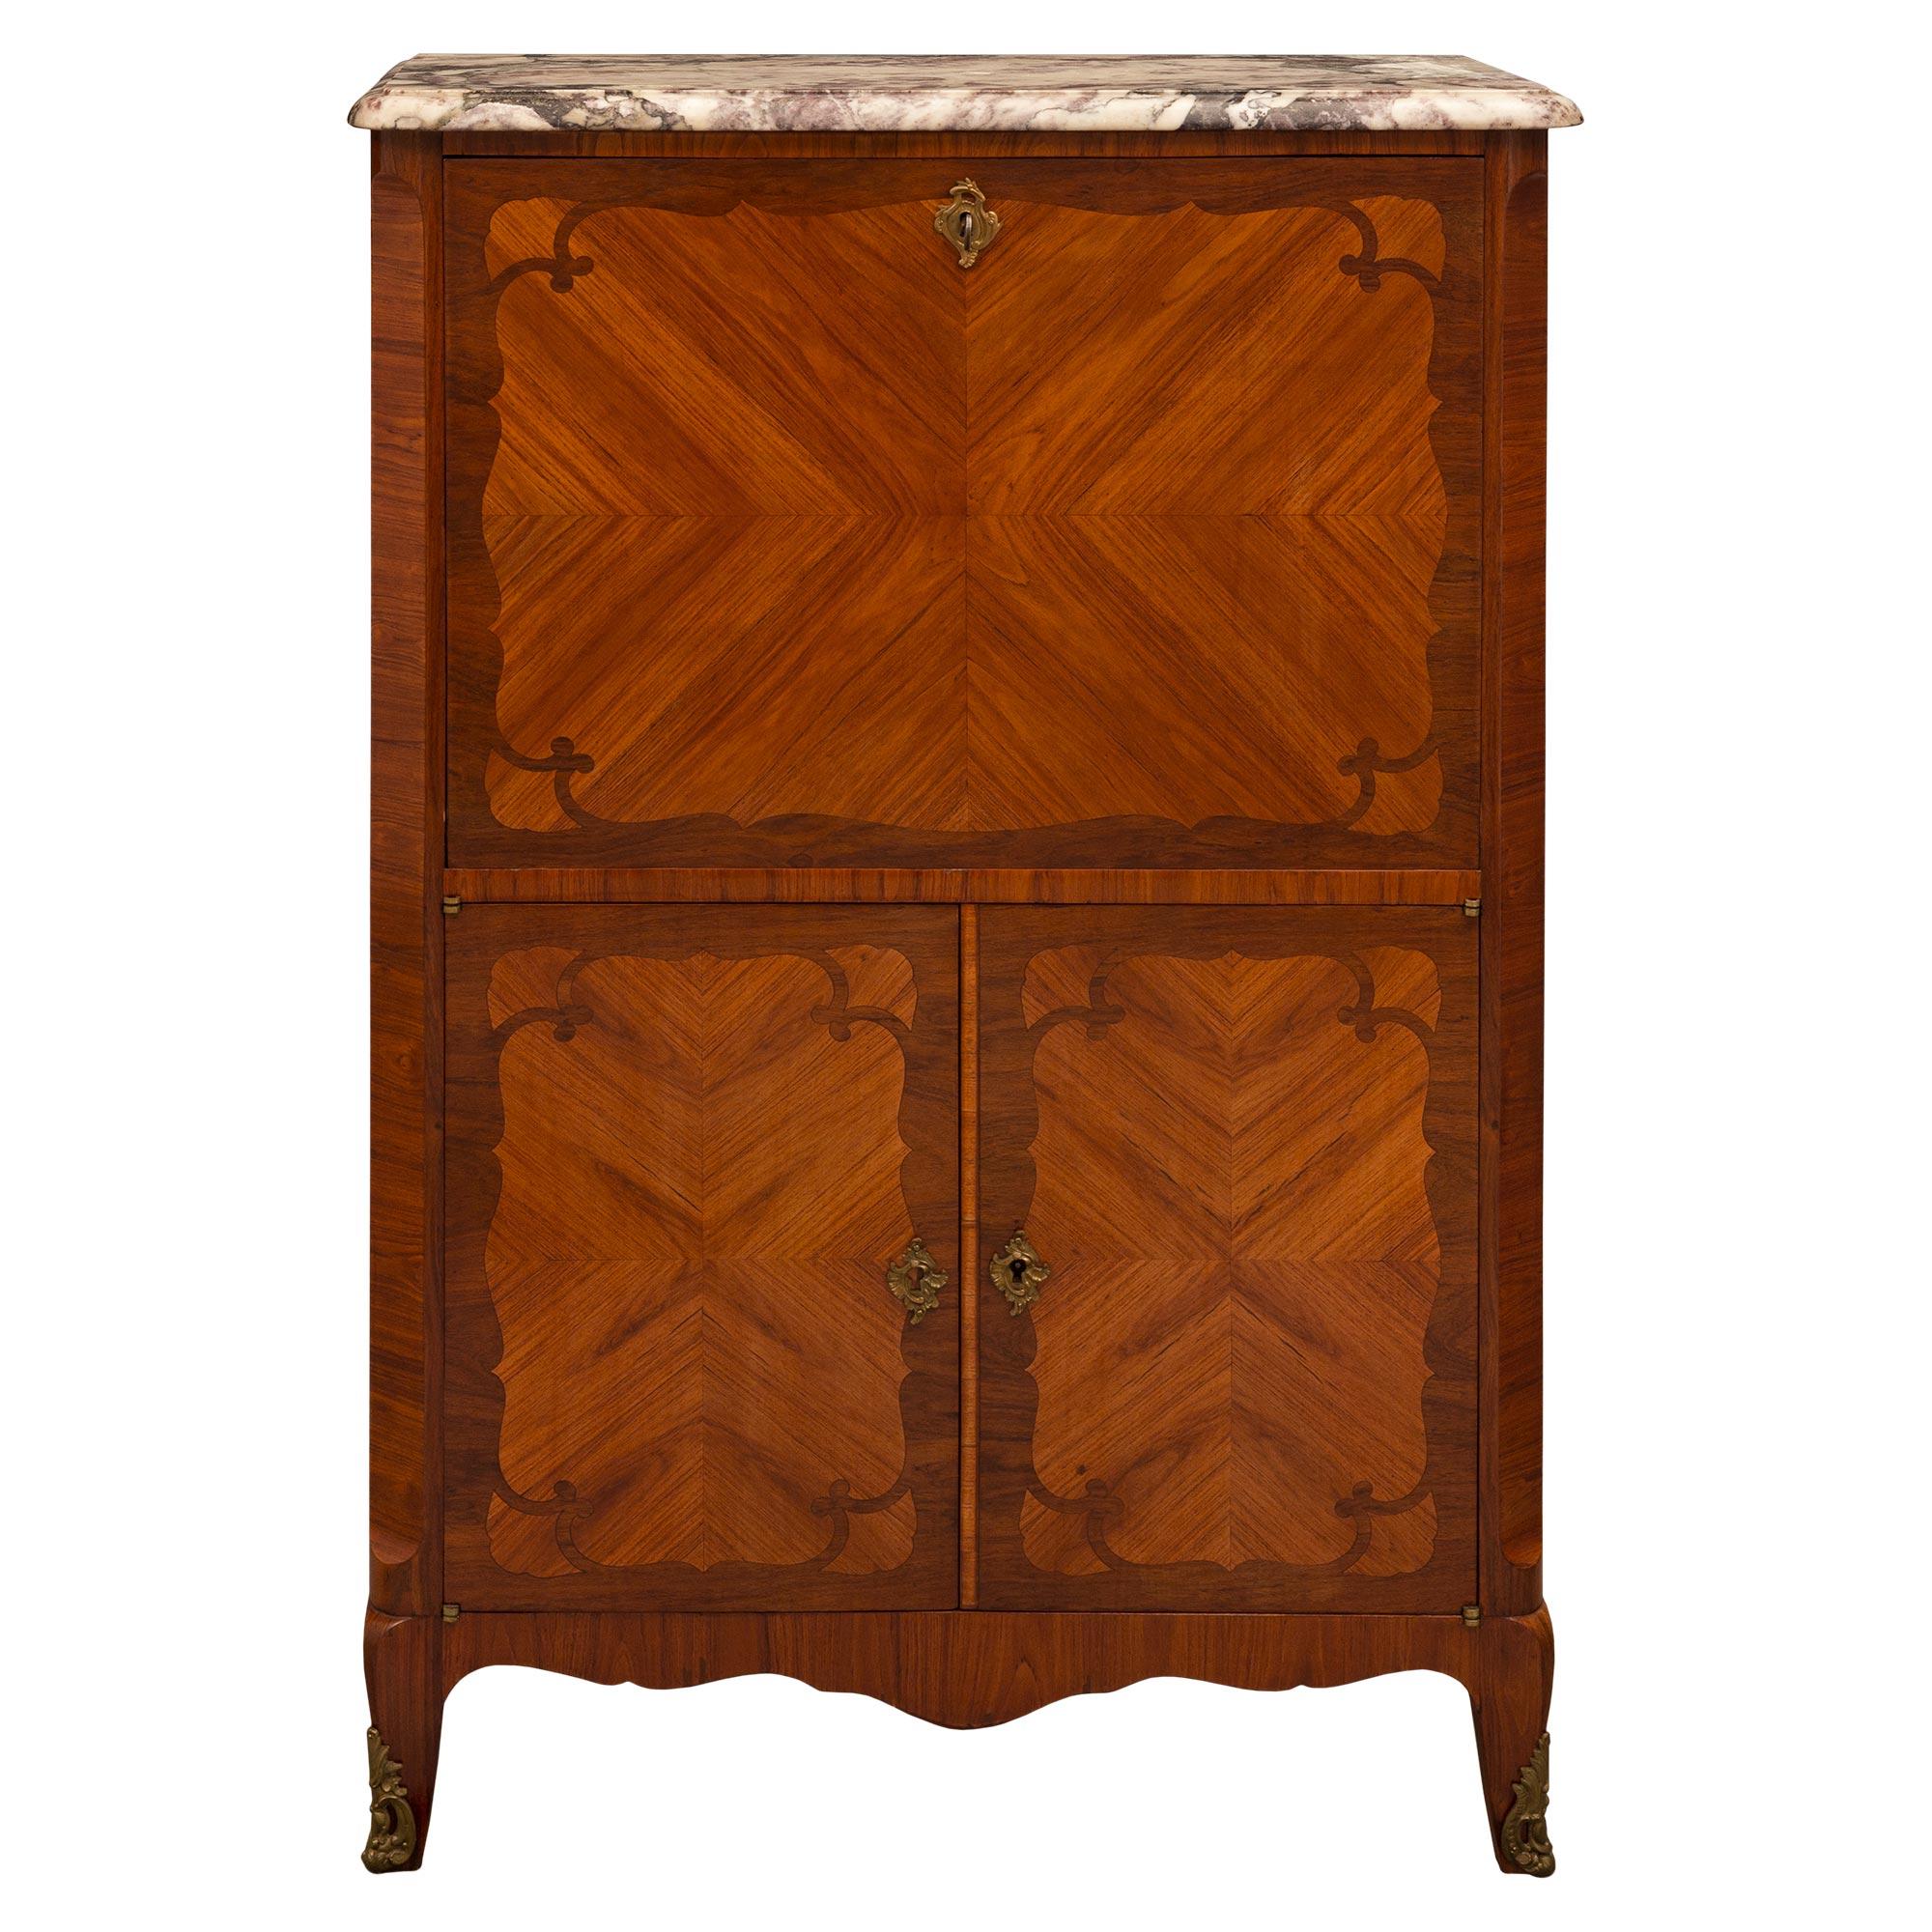 French Mid 19th Century Transitional St. Kingwood, Marble, and Ormolu Secretary For Sale